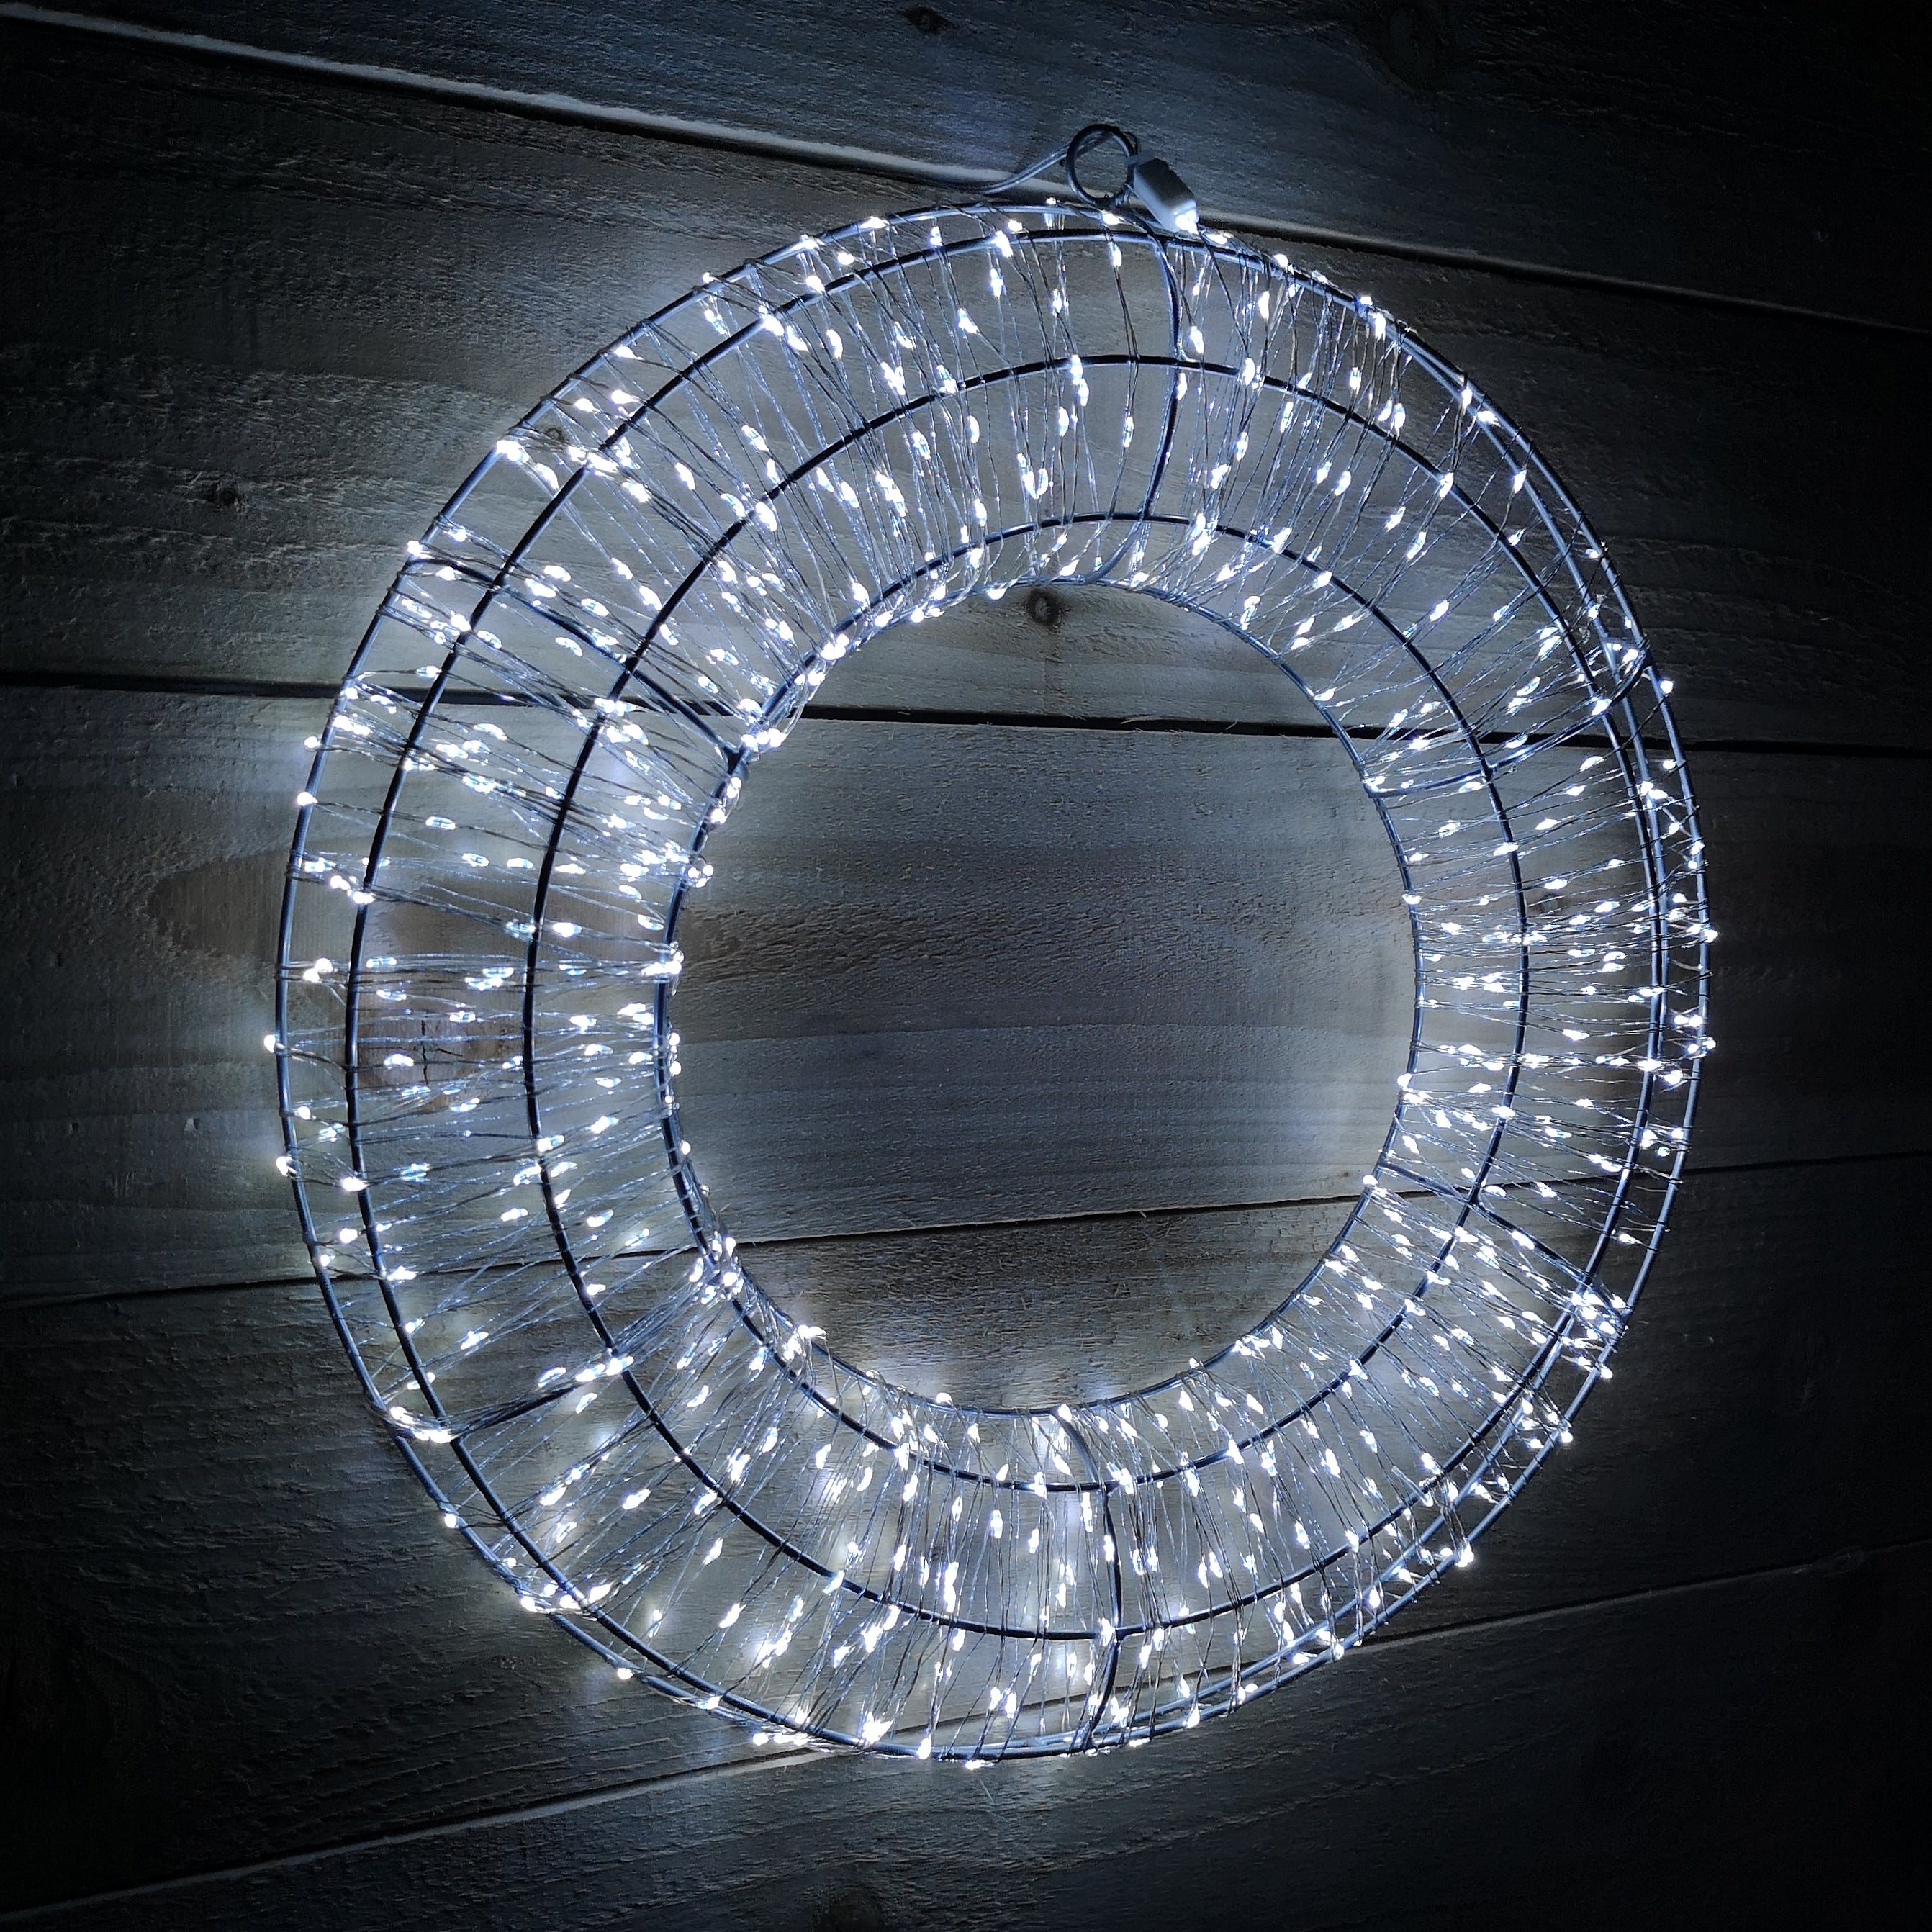 45cm Light up Silver Hanging Christmas Beaded Wreath with 600 White LEDs